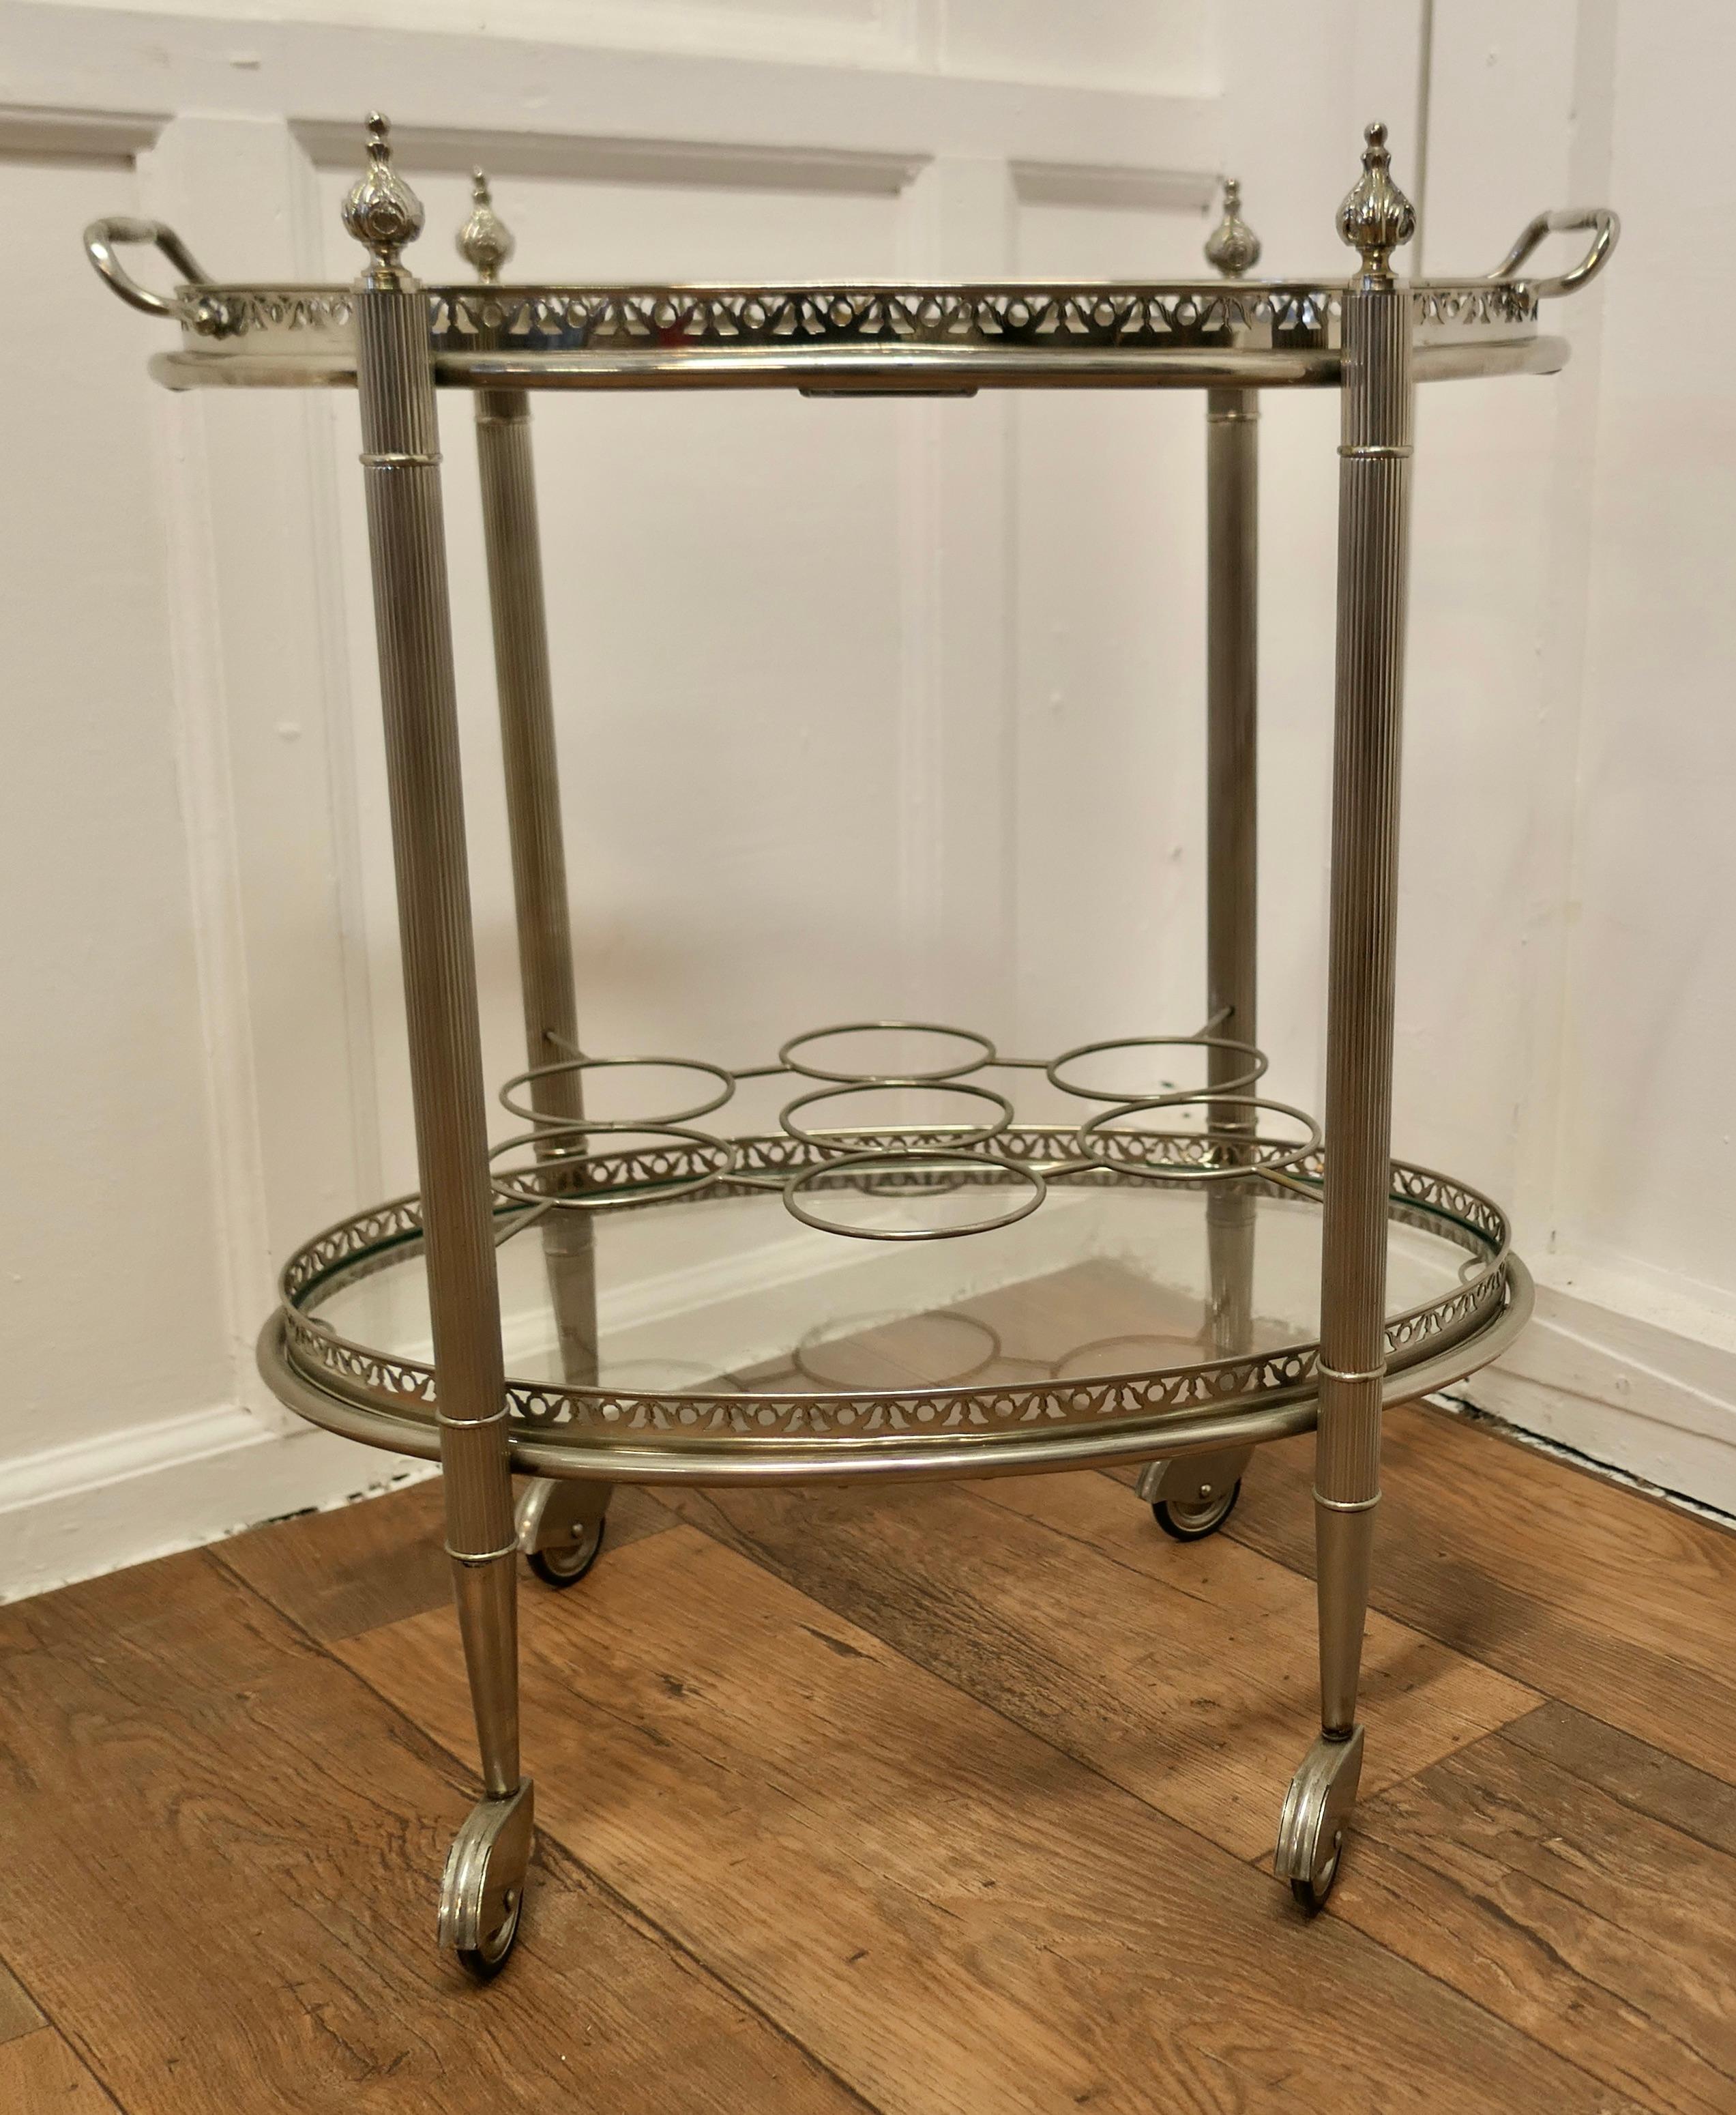 Vintage Art Deco Silver Drinks Trolley with Glass Tray
A Very Decorative piece with two tiers of glass, the top one is a tray which lifts off for a serving tray, the lower shelf has 7 bottle holders and at the bottom the trolly has silver hooded